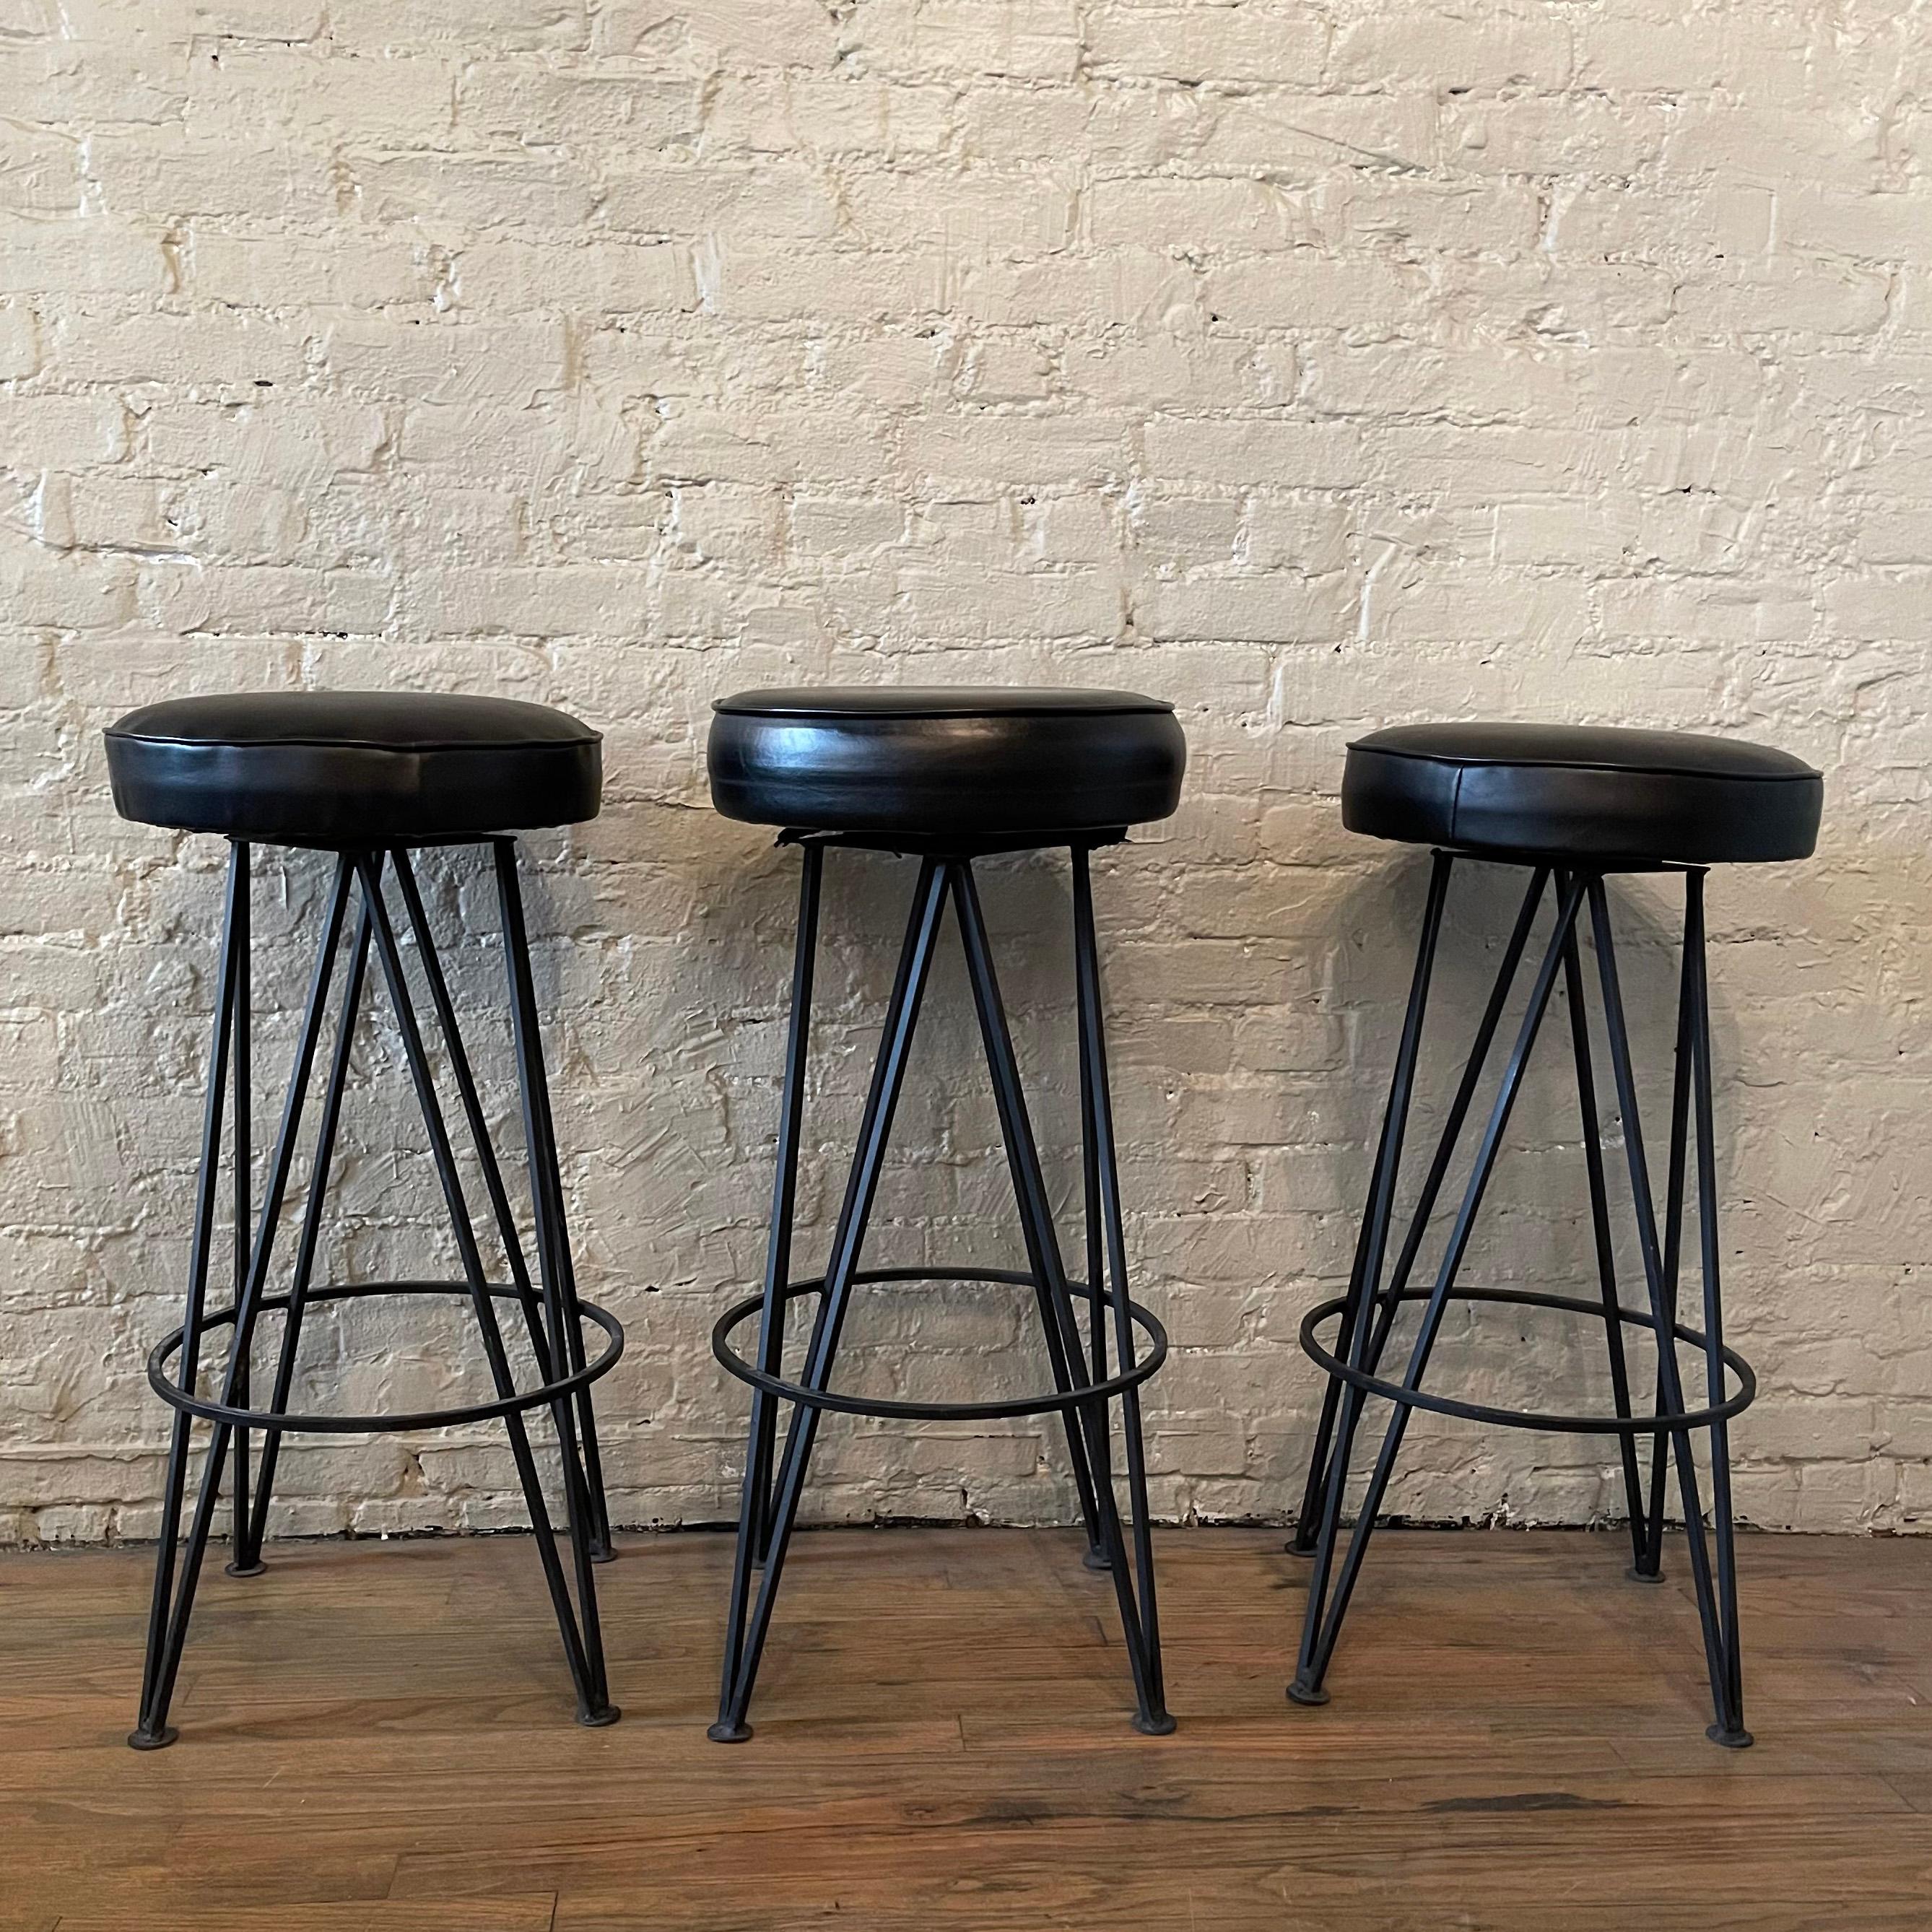 Mid-Century Modern Wrought Iron Hairpin Bar Stools In Good Condition For Sale In Brooklyn, NY